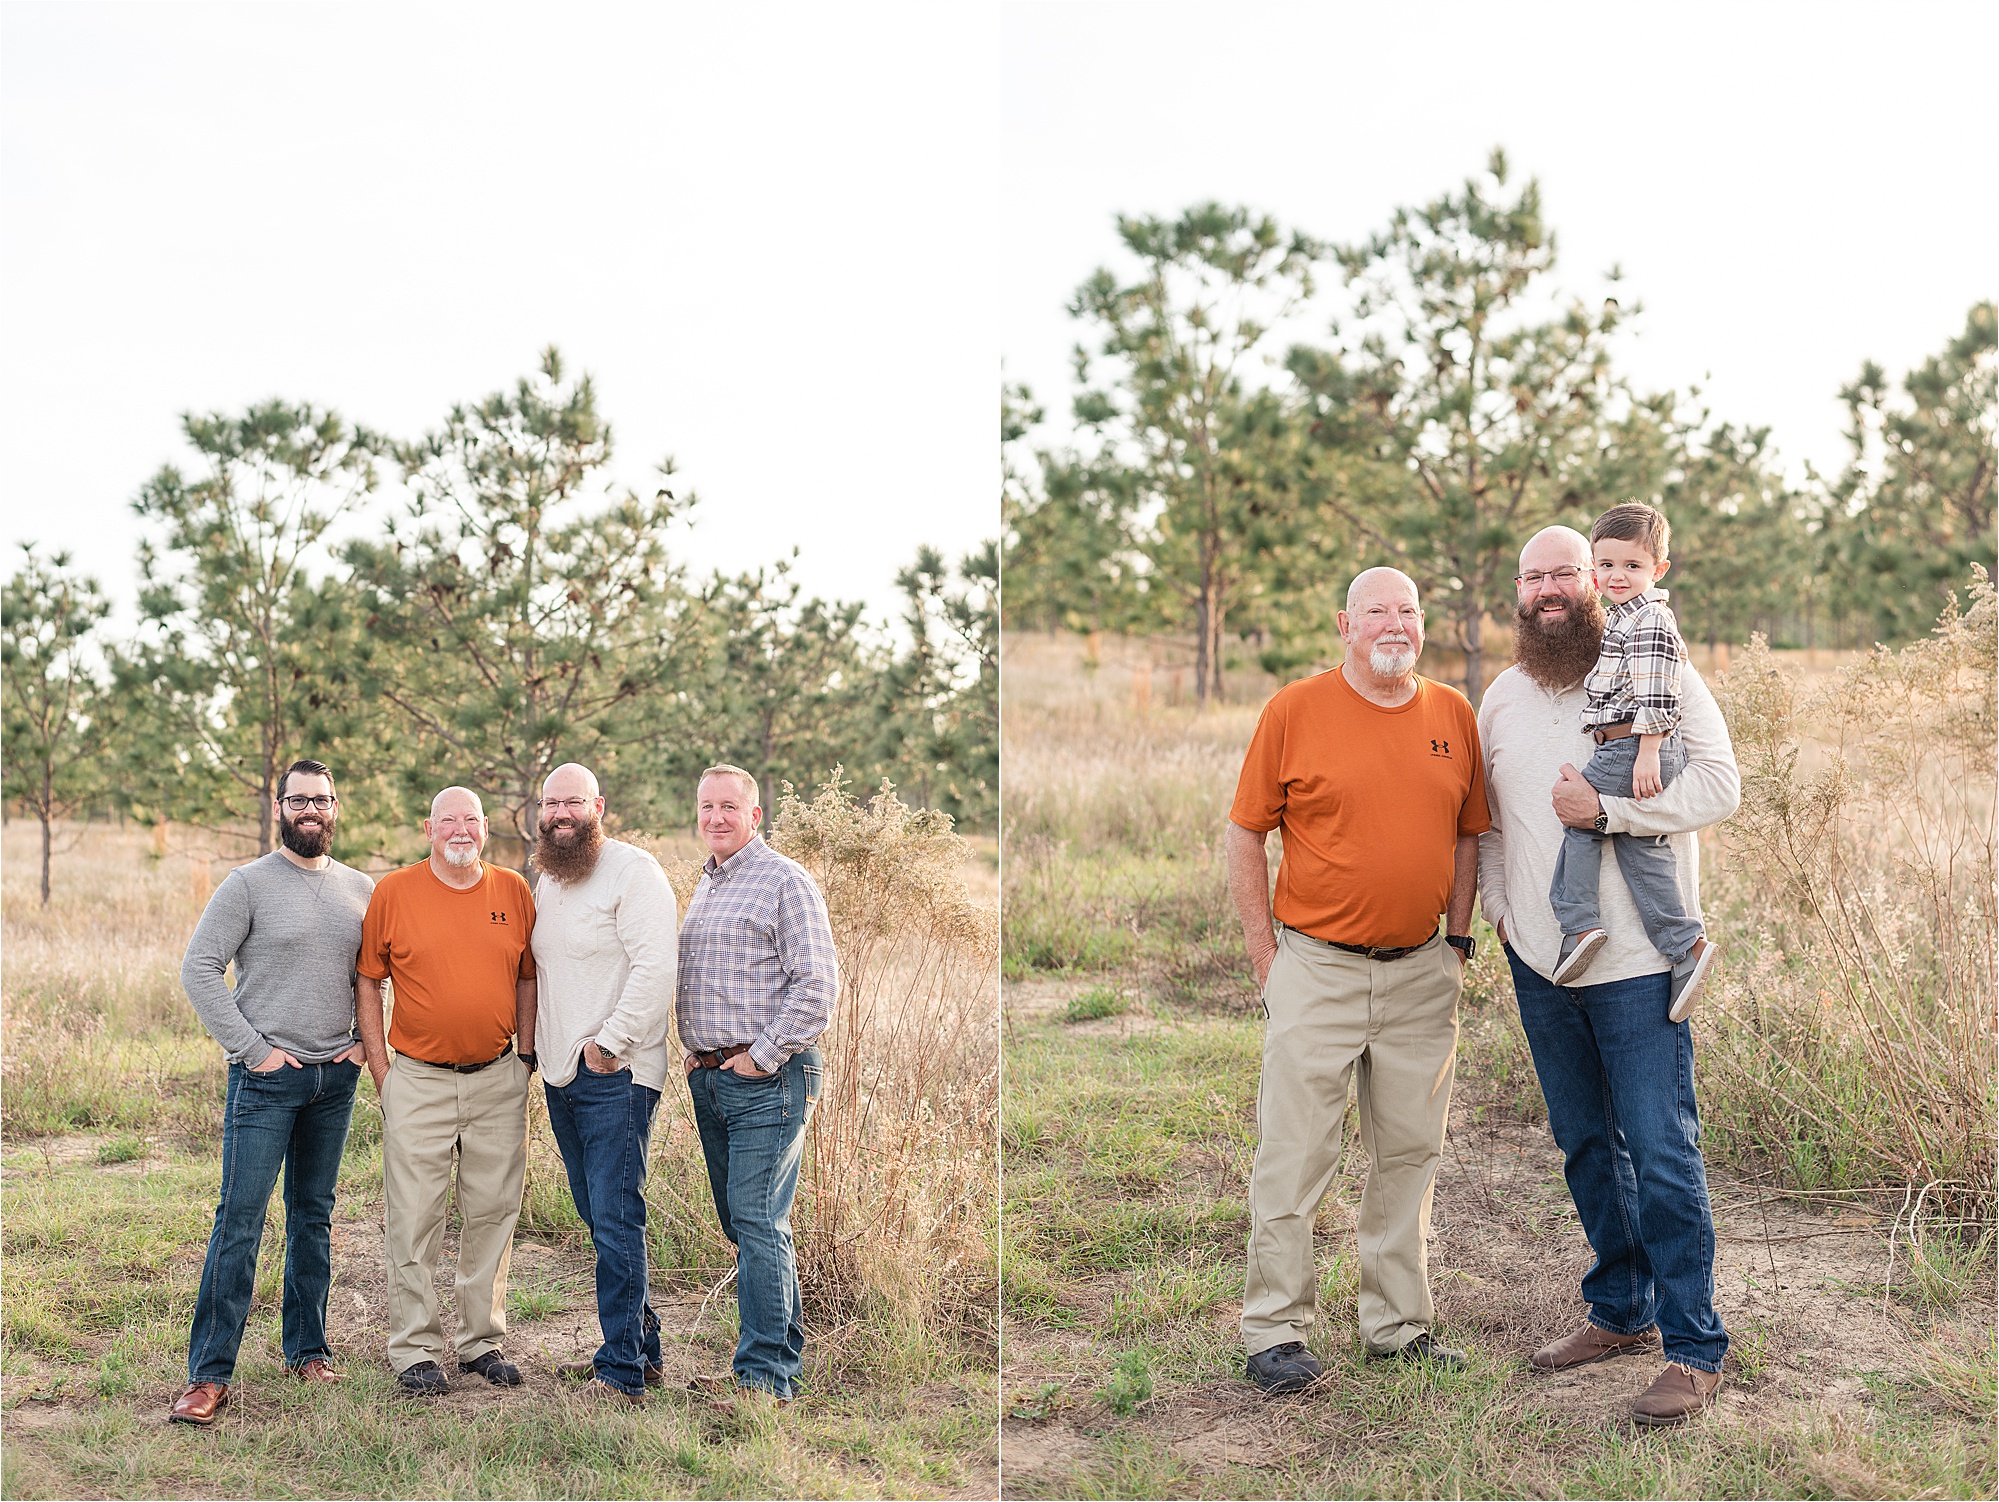 Extended Family Photos at Lake Louisa State Park, FL